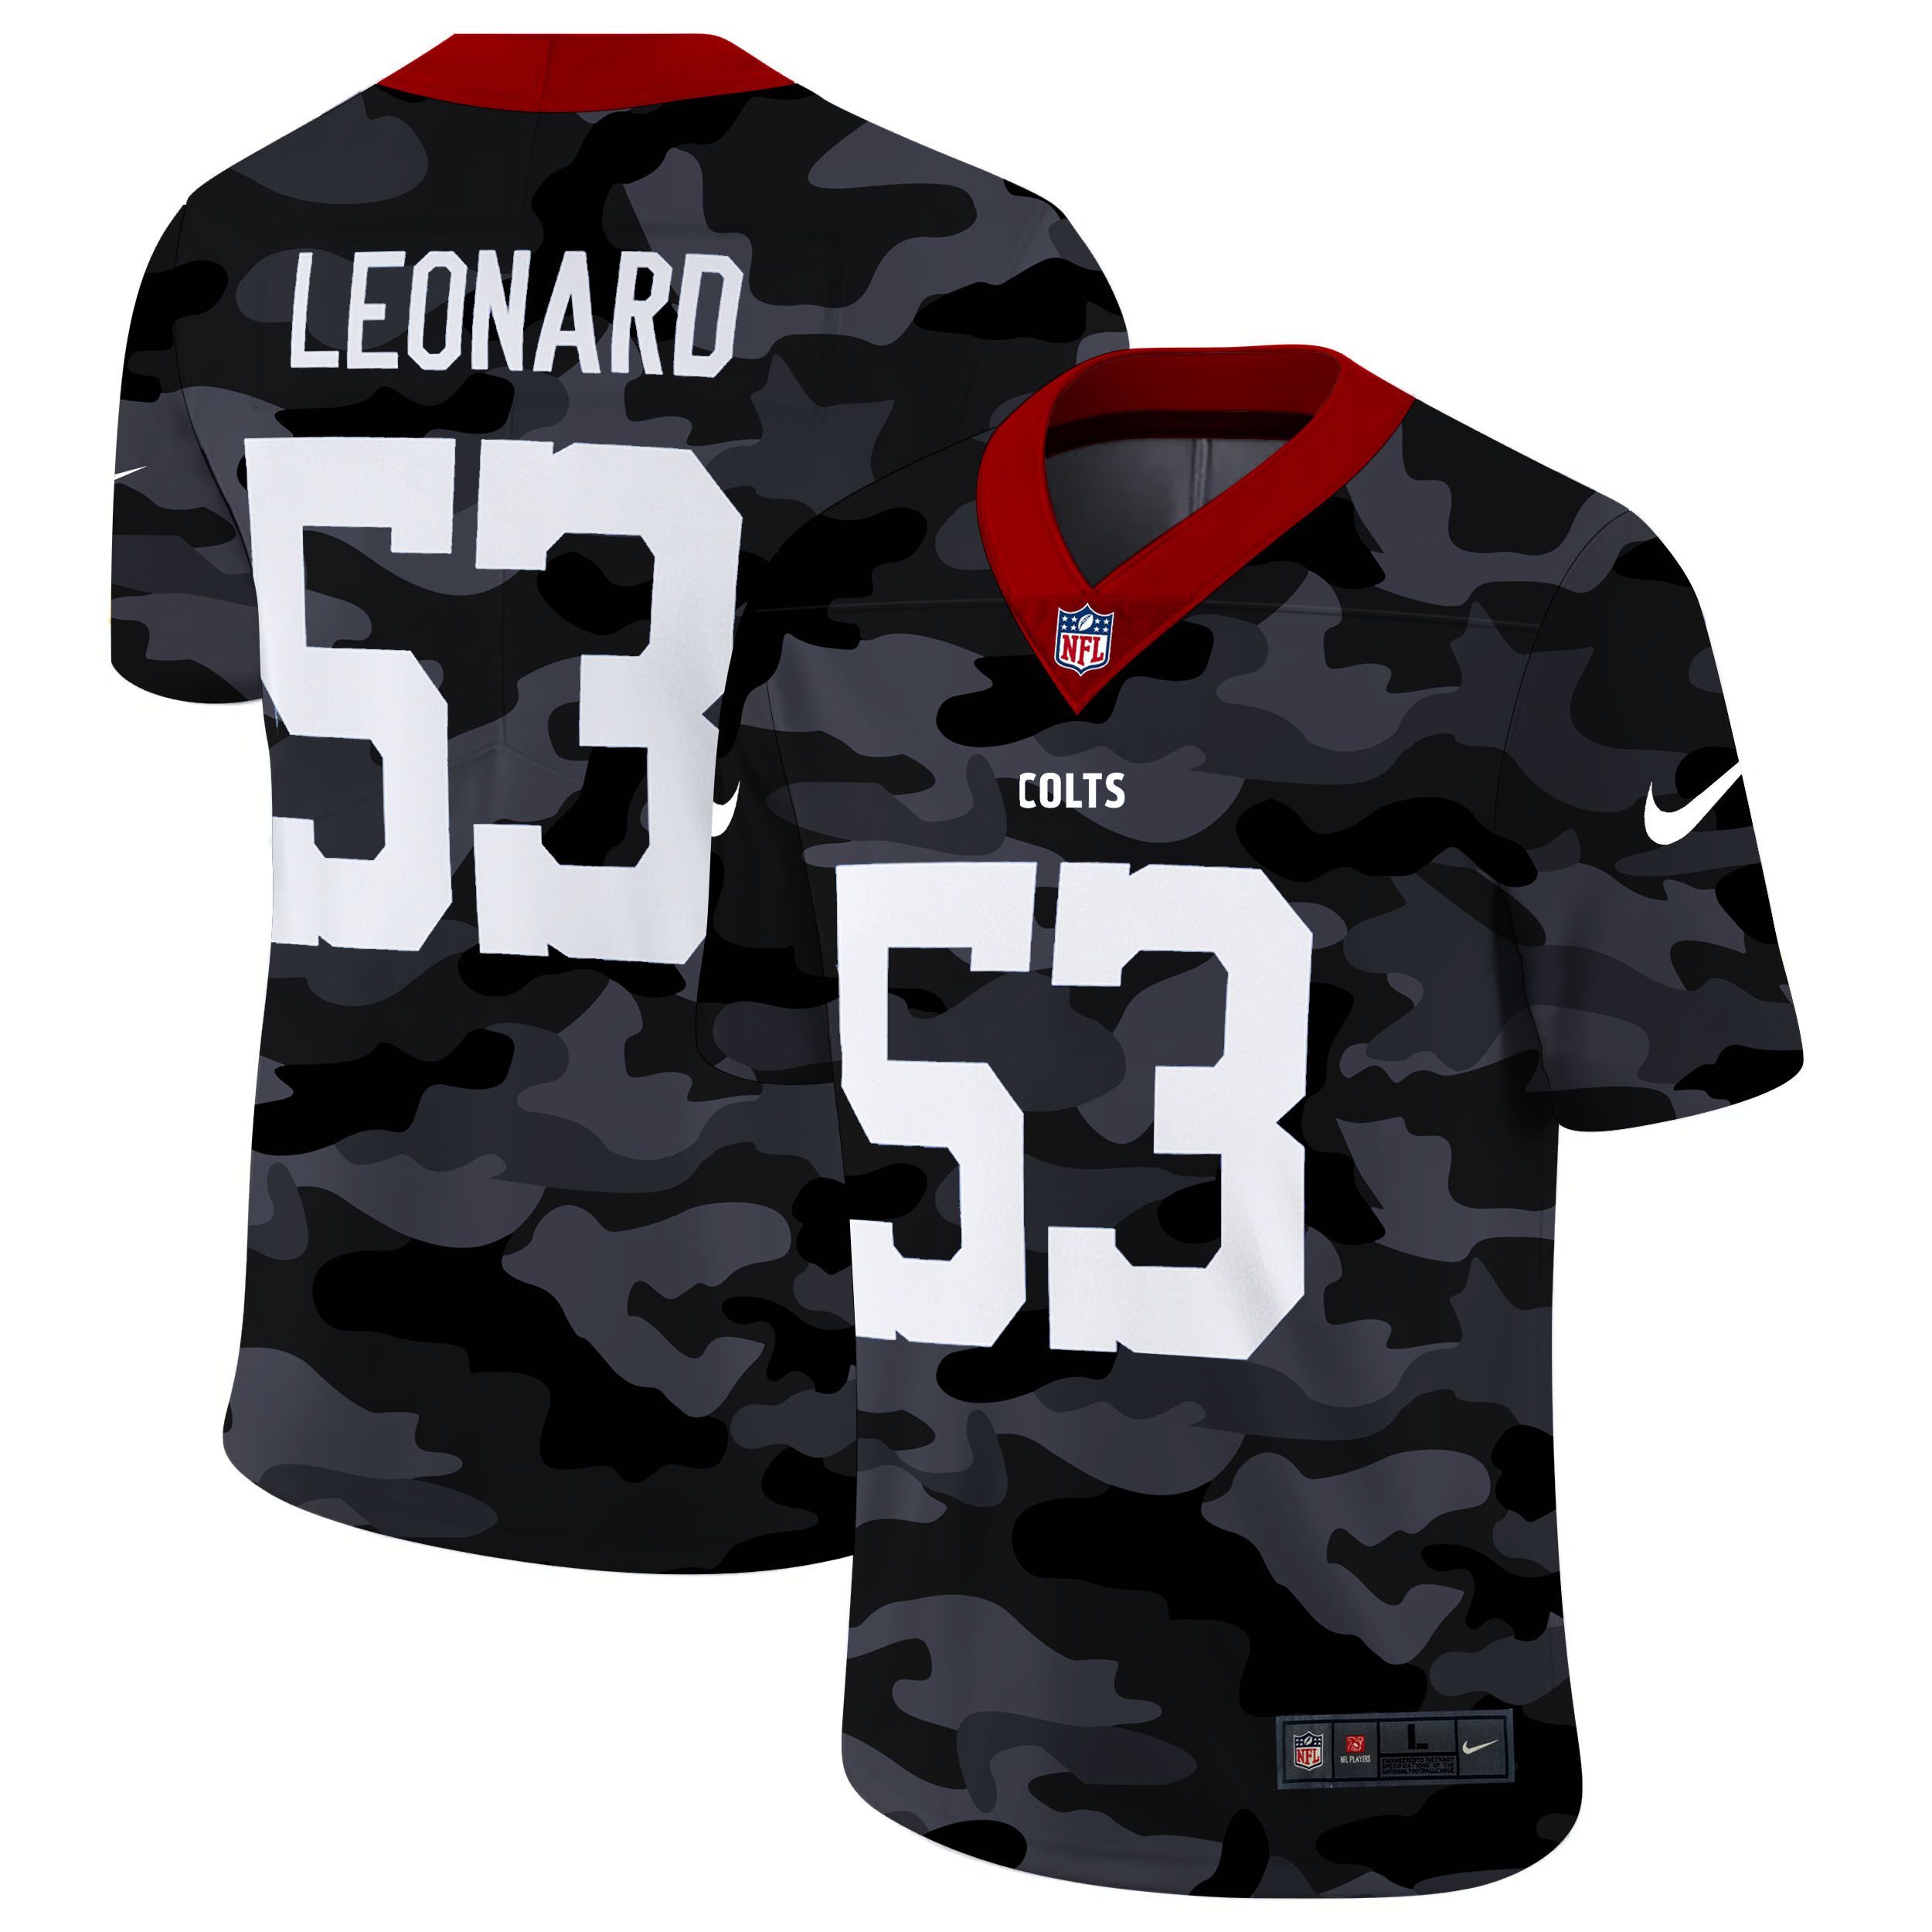 Men Indianapolis Colts #53 Leonard 2020 Nike 2ndCamo Salute to Service Limited NFL Jerseys->indianapolis colts->NFL Jersey